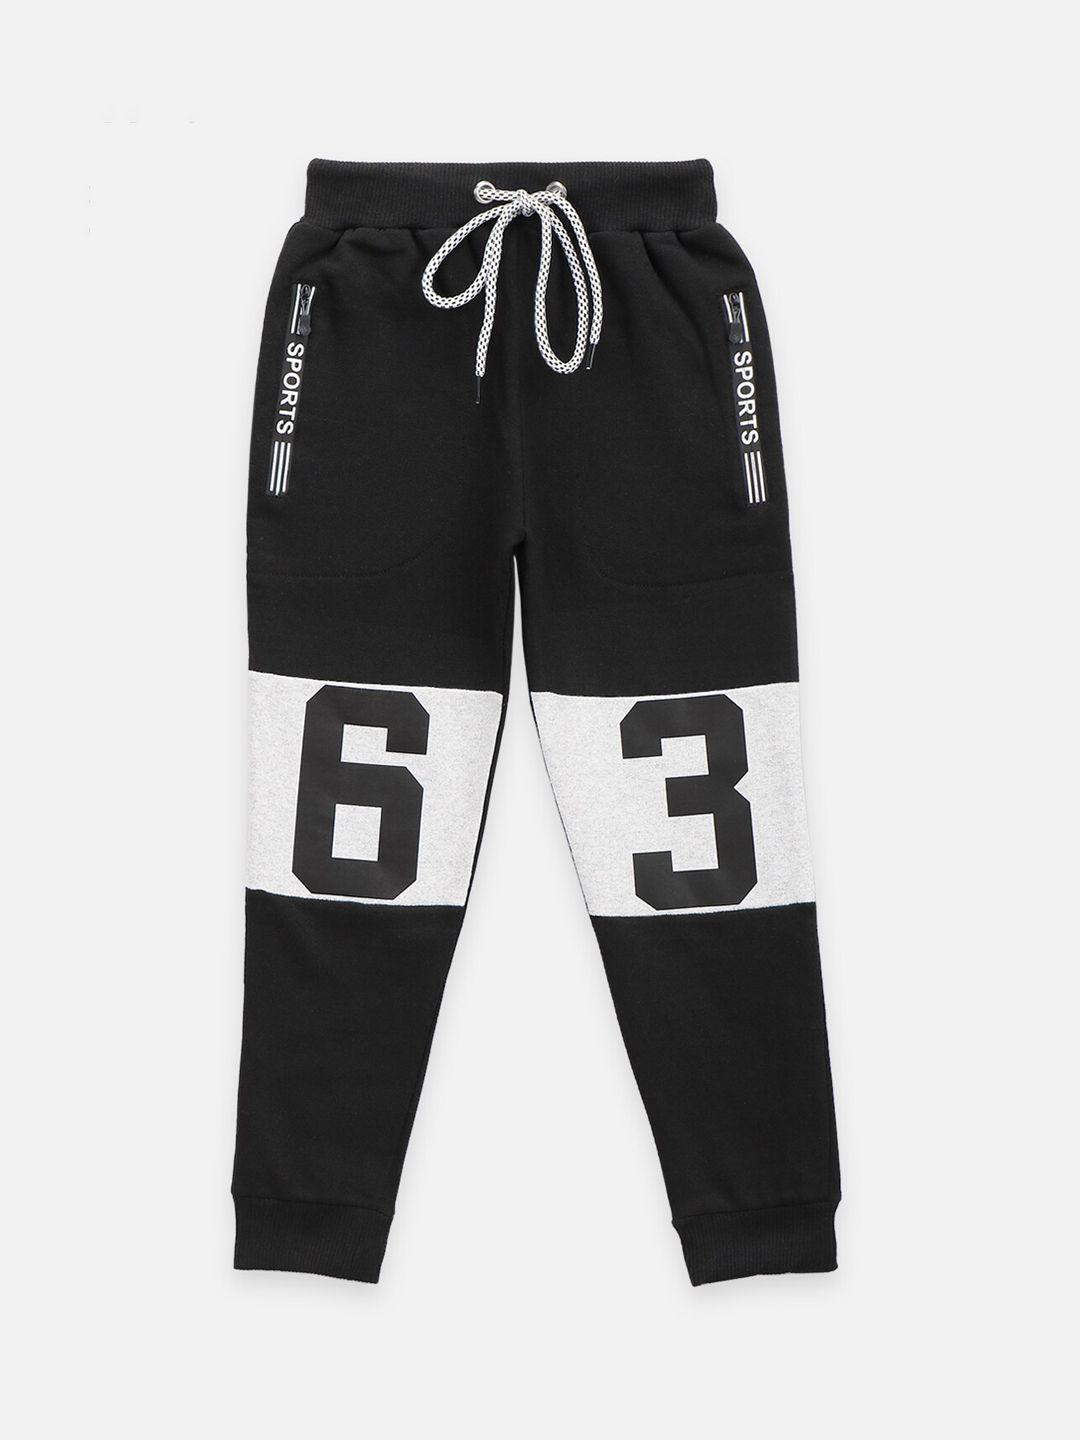 lilpicks boys black and white printed relaxed fit track pants